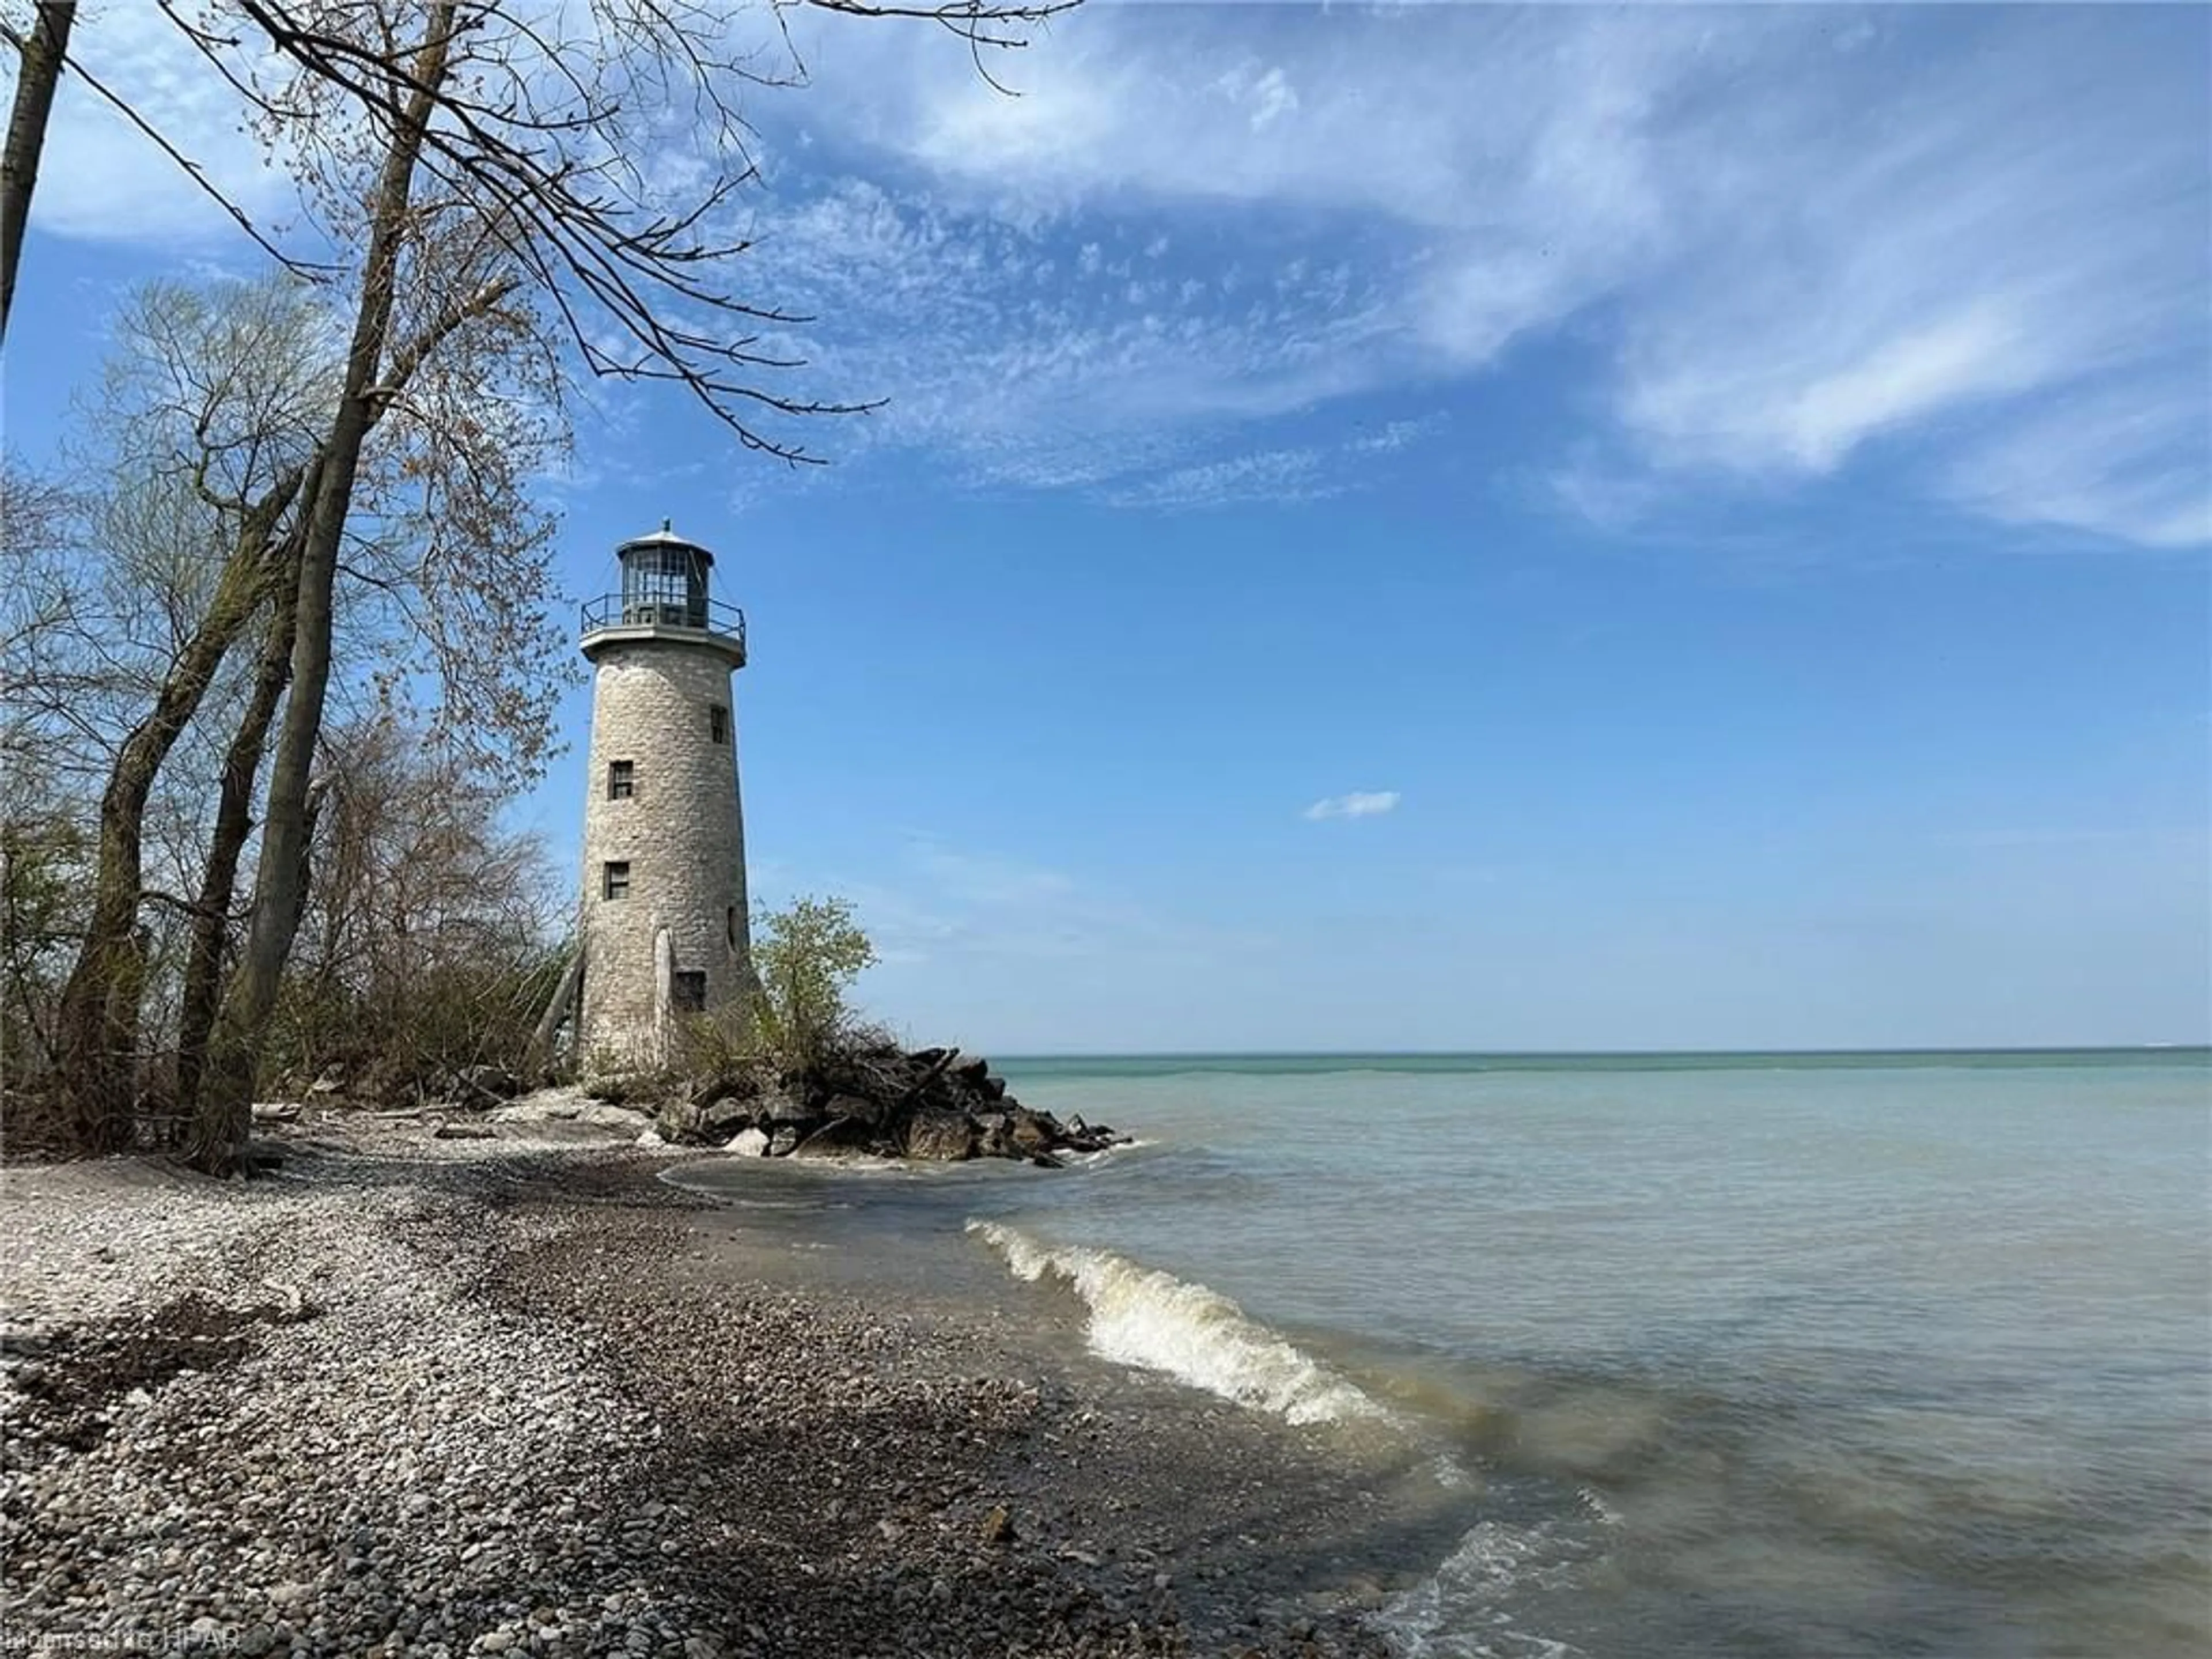 Lakeview for 321 W Shore Rd, Pelee Island Ontario N0R 1M0